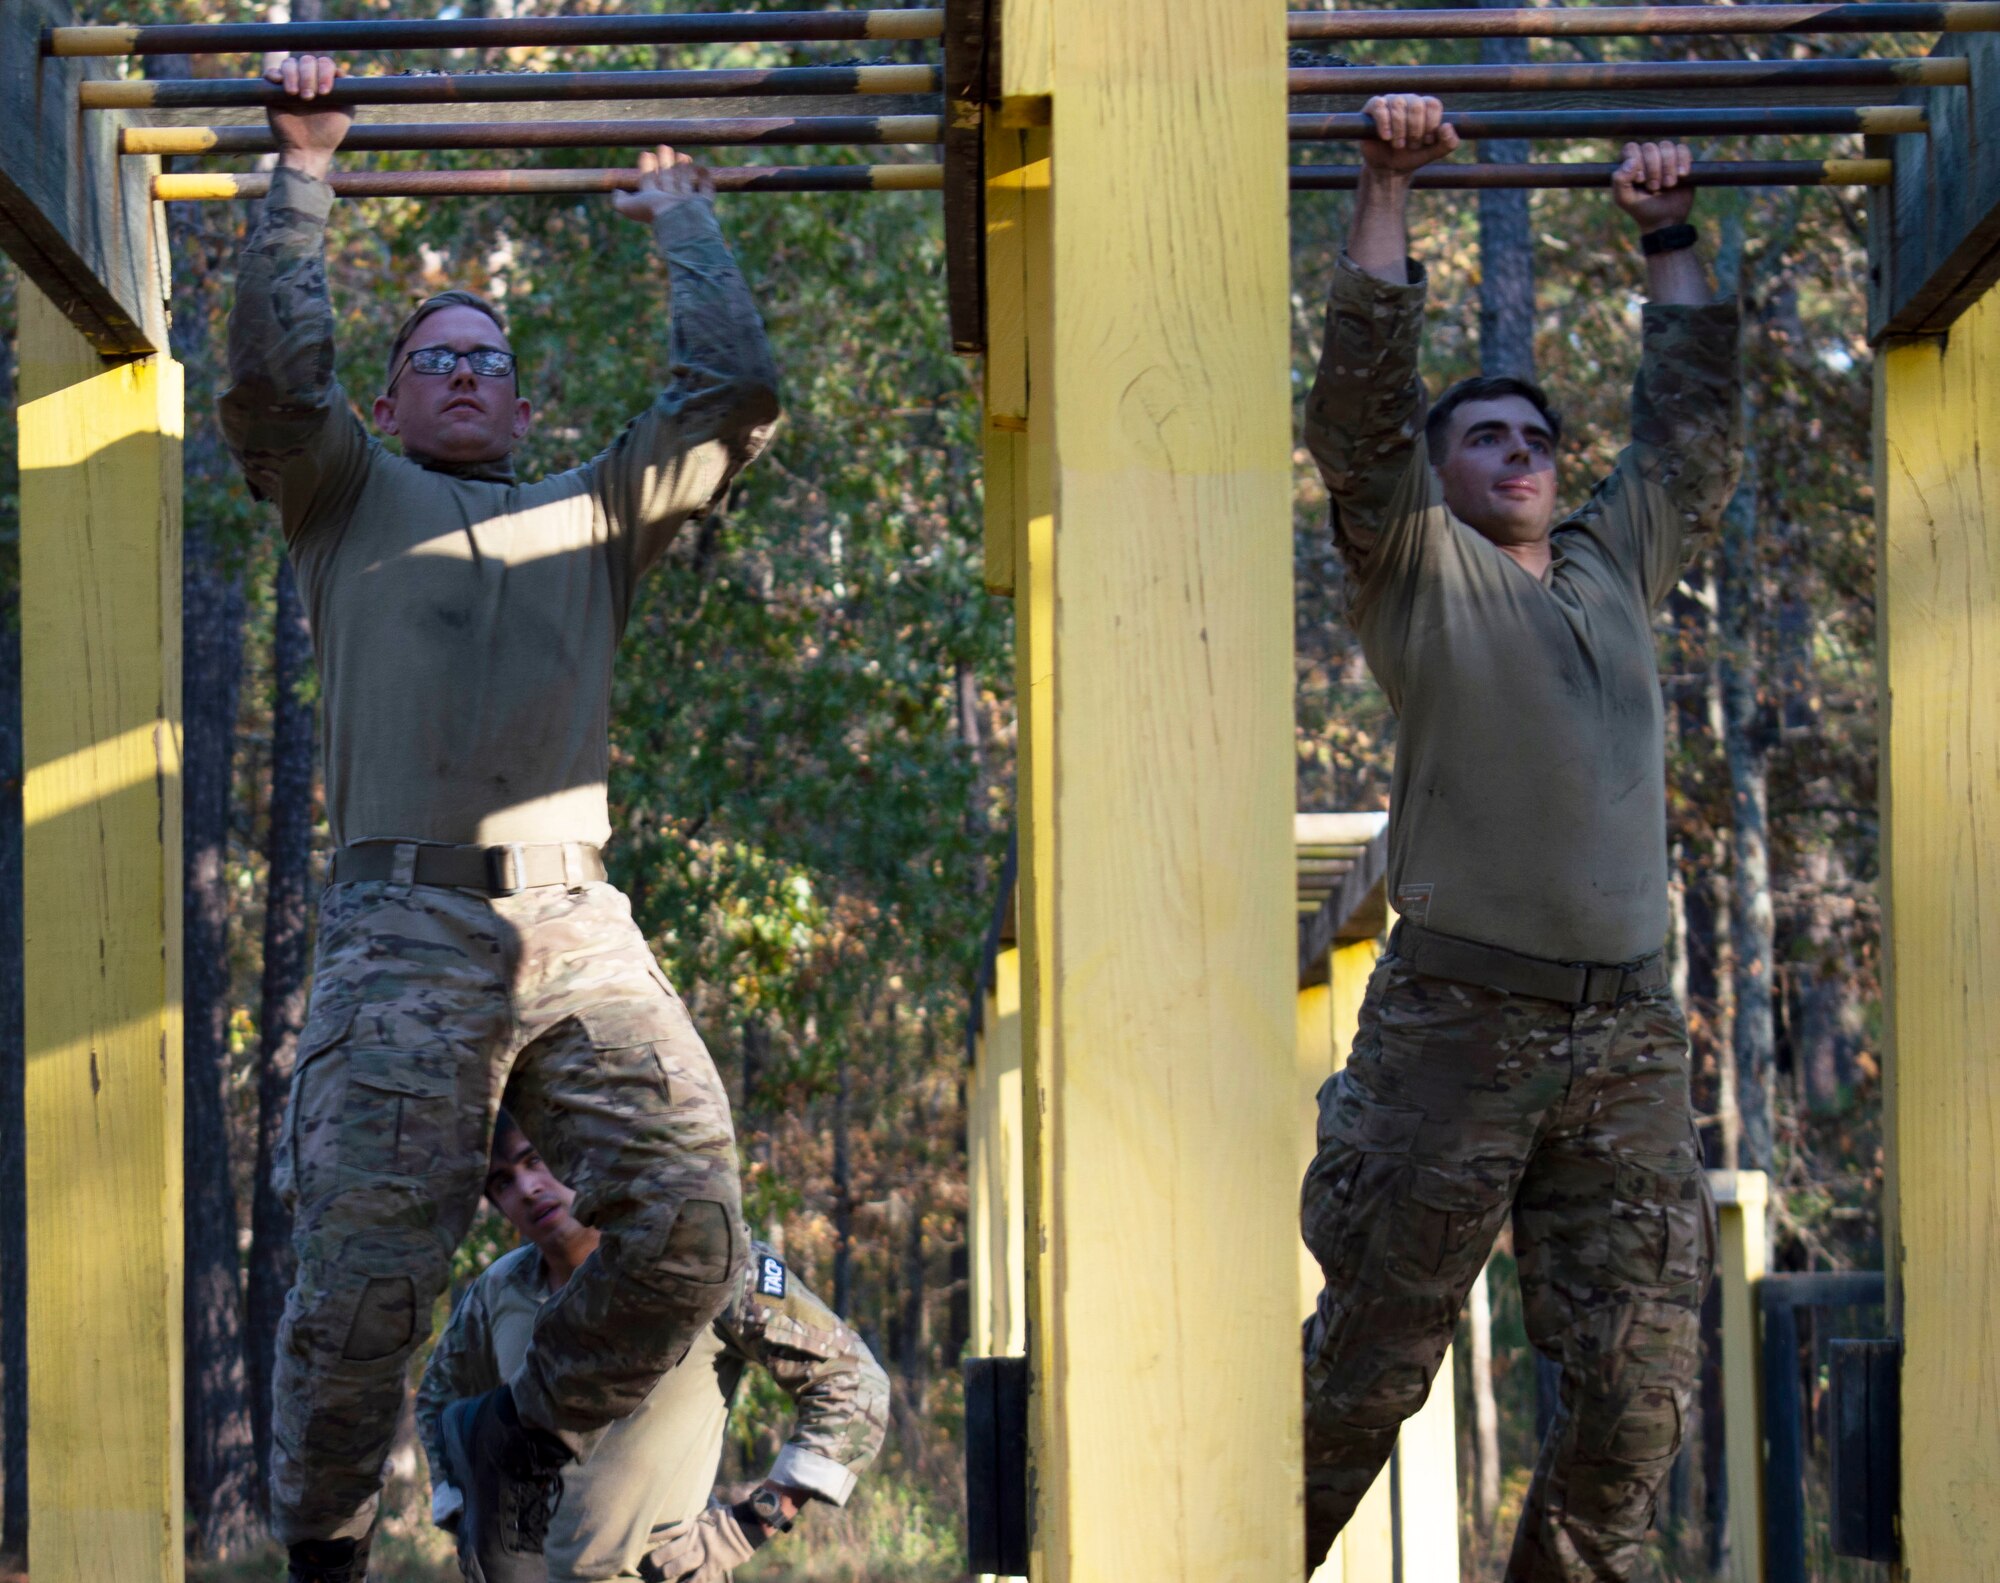 Twenty-four Airmen completed the 2019 Dragon Challenge at Pope Army Airfield Nov. 5-7. The annual three day competition is designed to prepare Airmen for the stress of combat includes a battlefield fitness test, shooting, casualty care, land navigation, obstacle course, knowledge test and combatives.